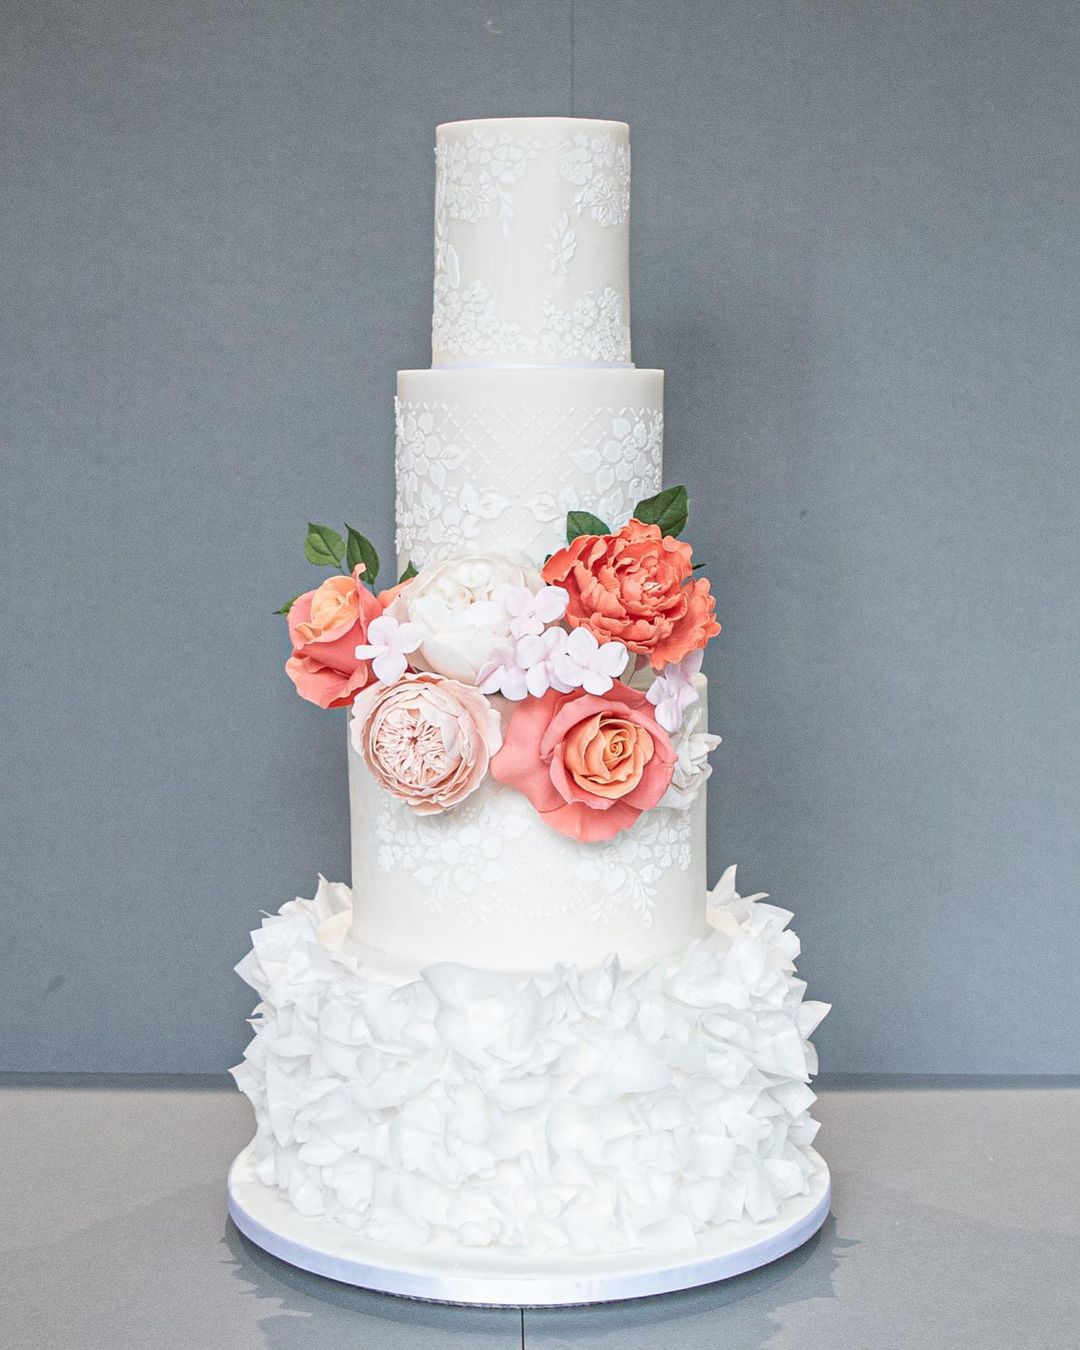 vintage 4 tier lace and ruffles wedding cake with coral flowers via cakedaydreams